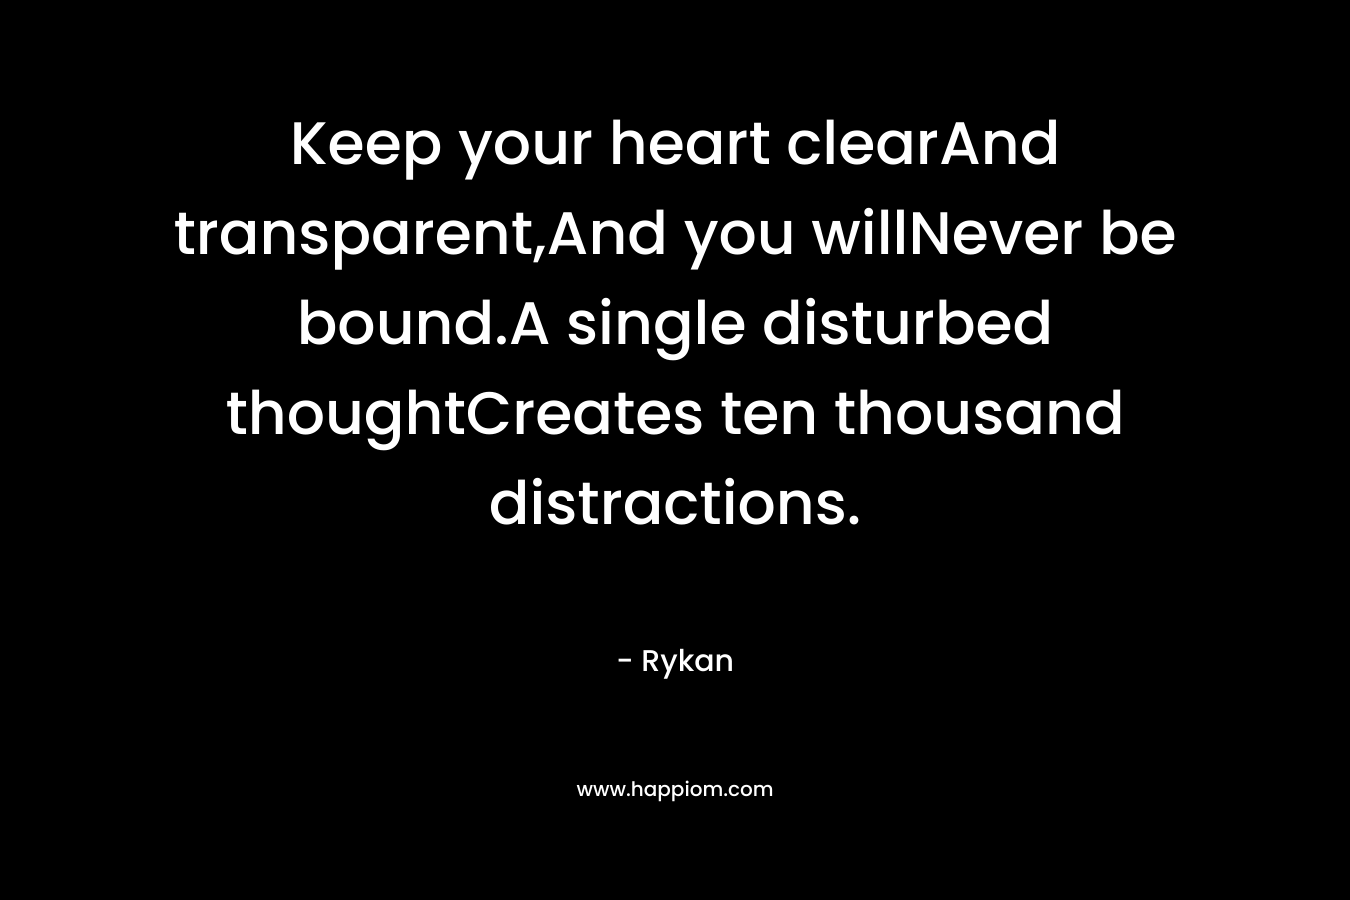 Keep your heart clearAnd transparent,And you willNever be bound.A single disturbed thoughtCreates ten thousand distractions.